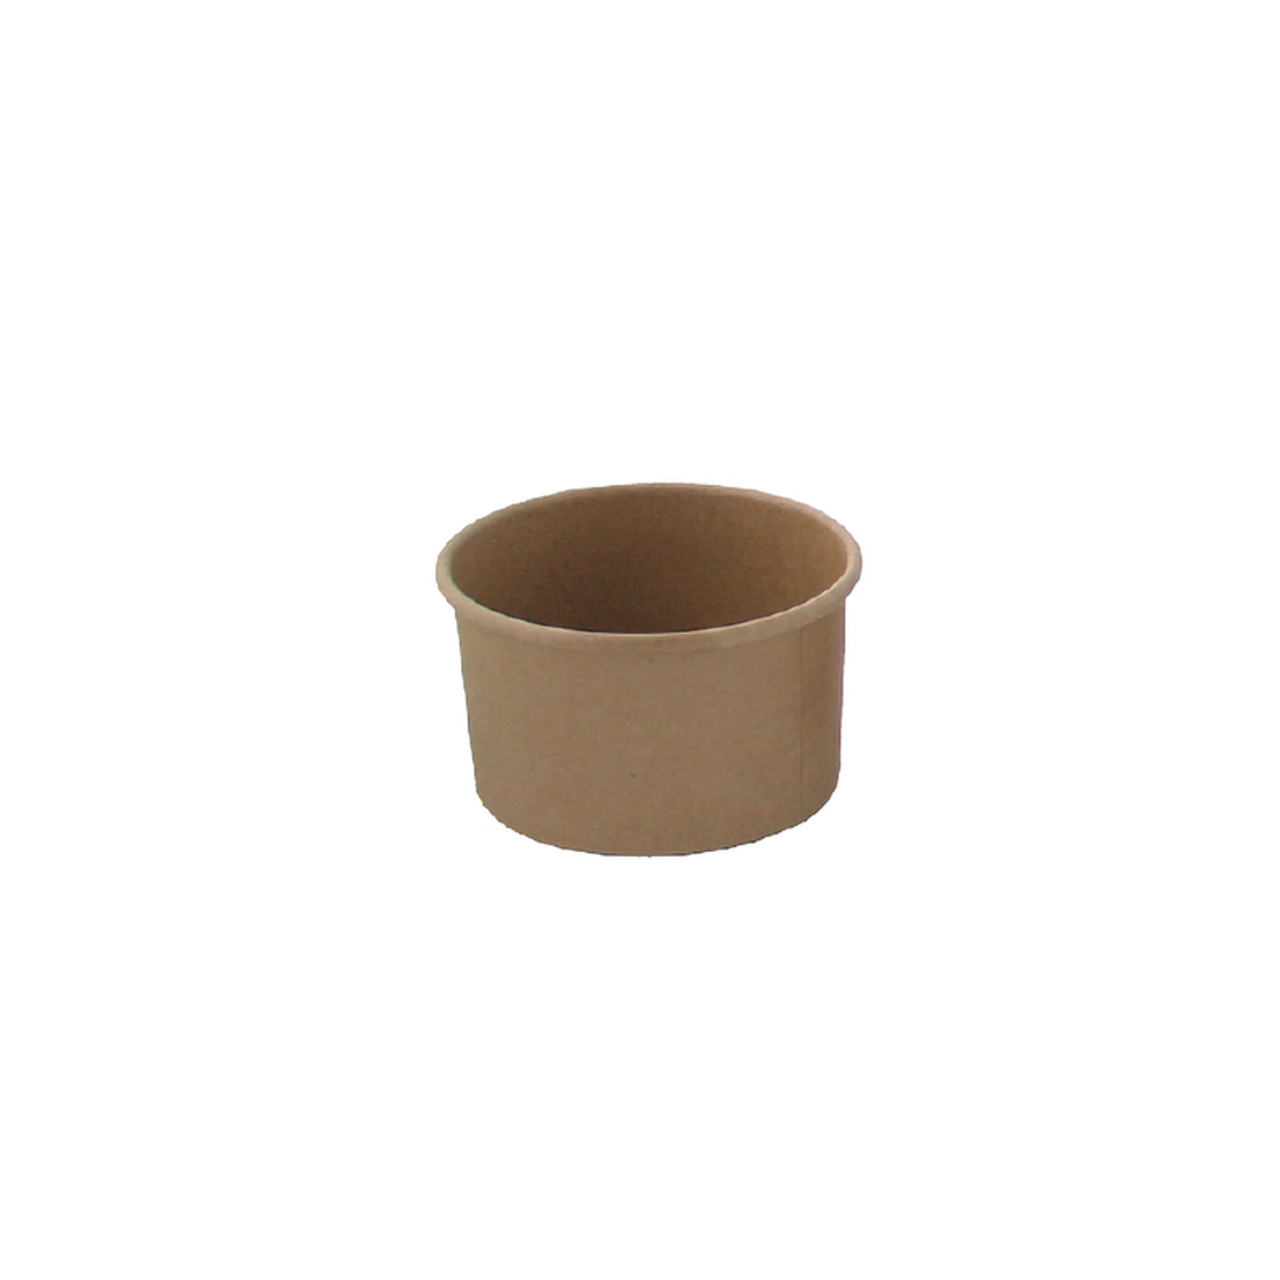 Chocolate Brown Plastic Cup 16oz 50ct